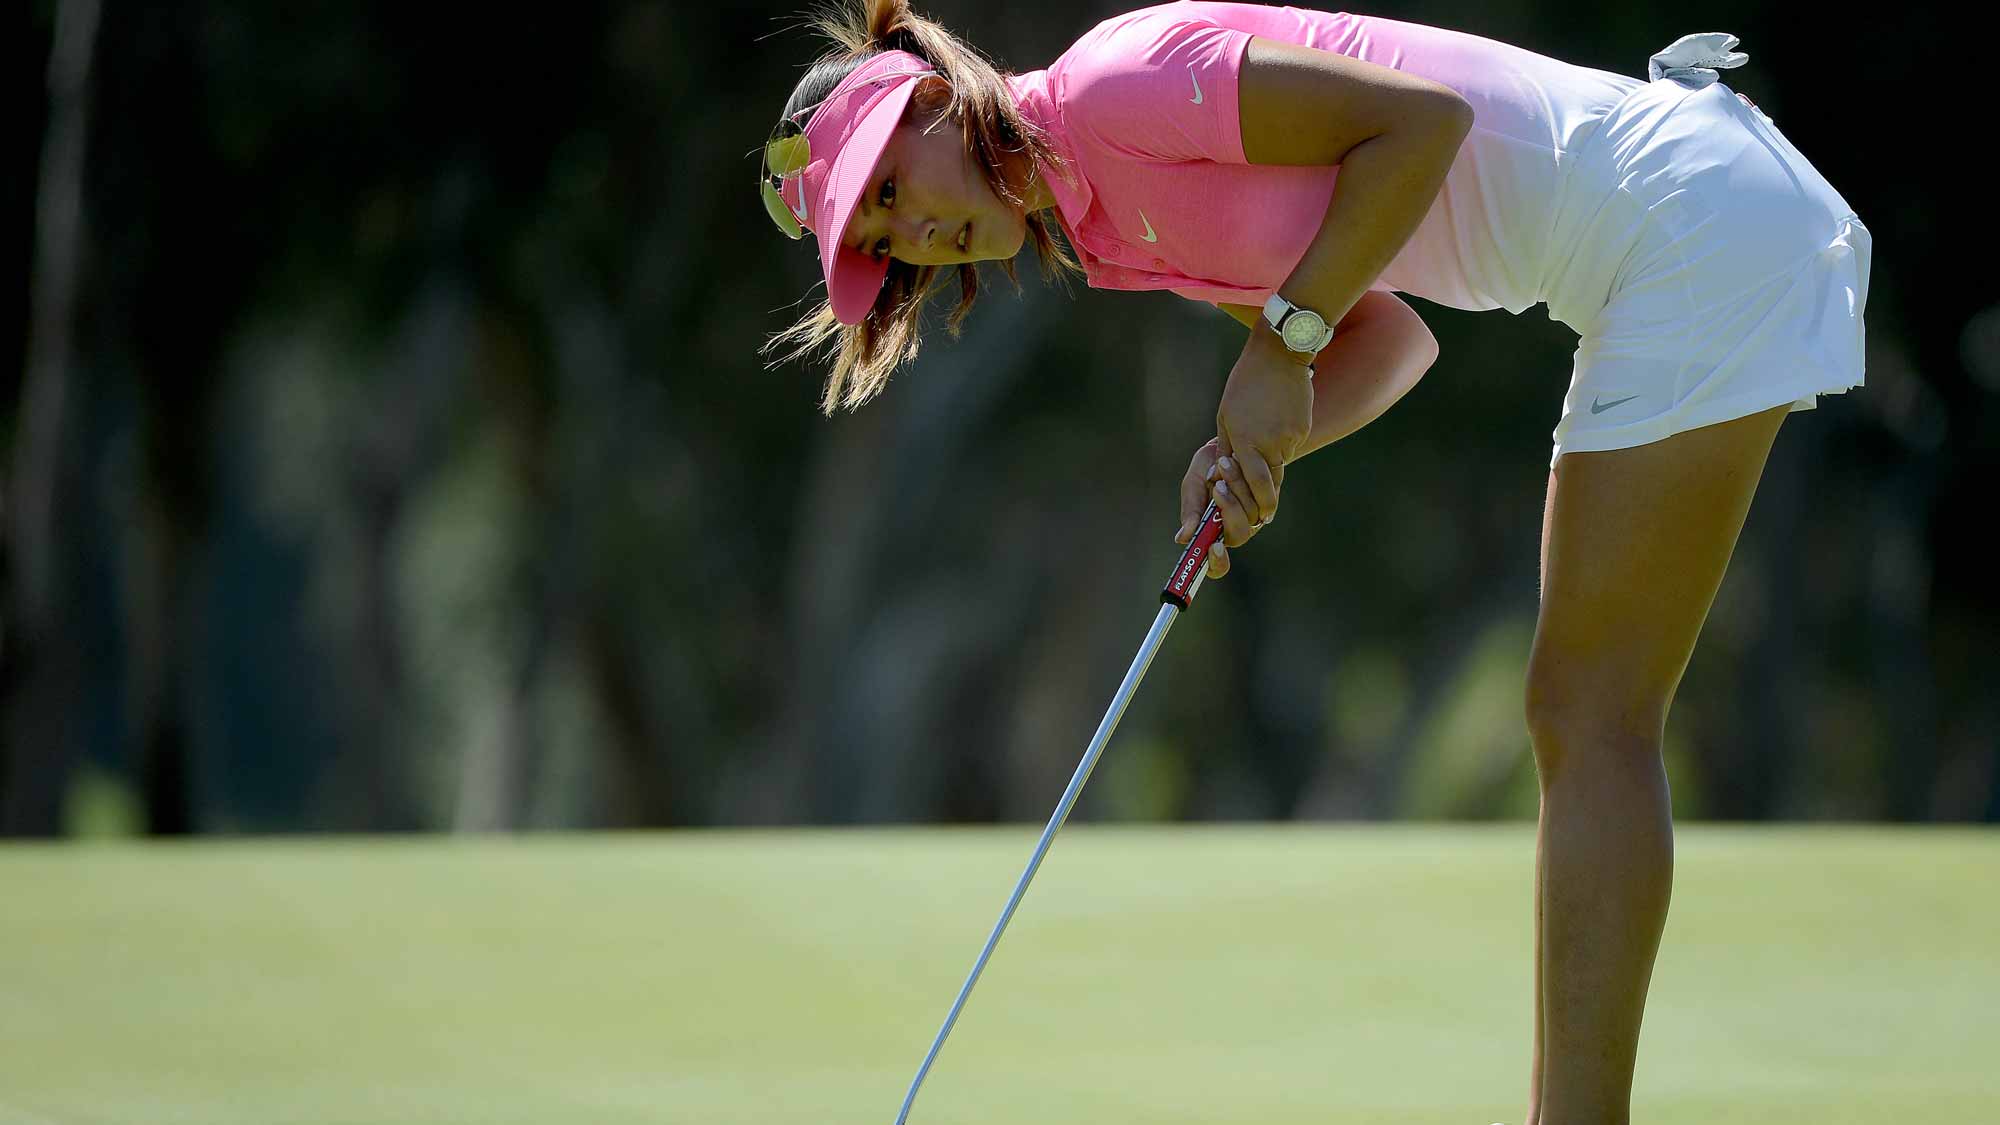 Michelle Wie hits a putt on the 10th green during Final Round of the LPGA KIA Classic at the Aviara Golf Club